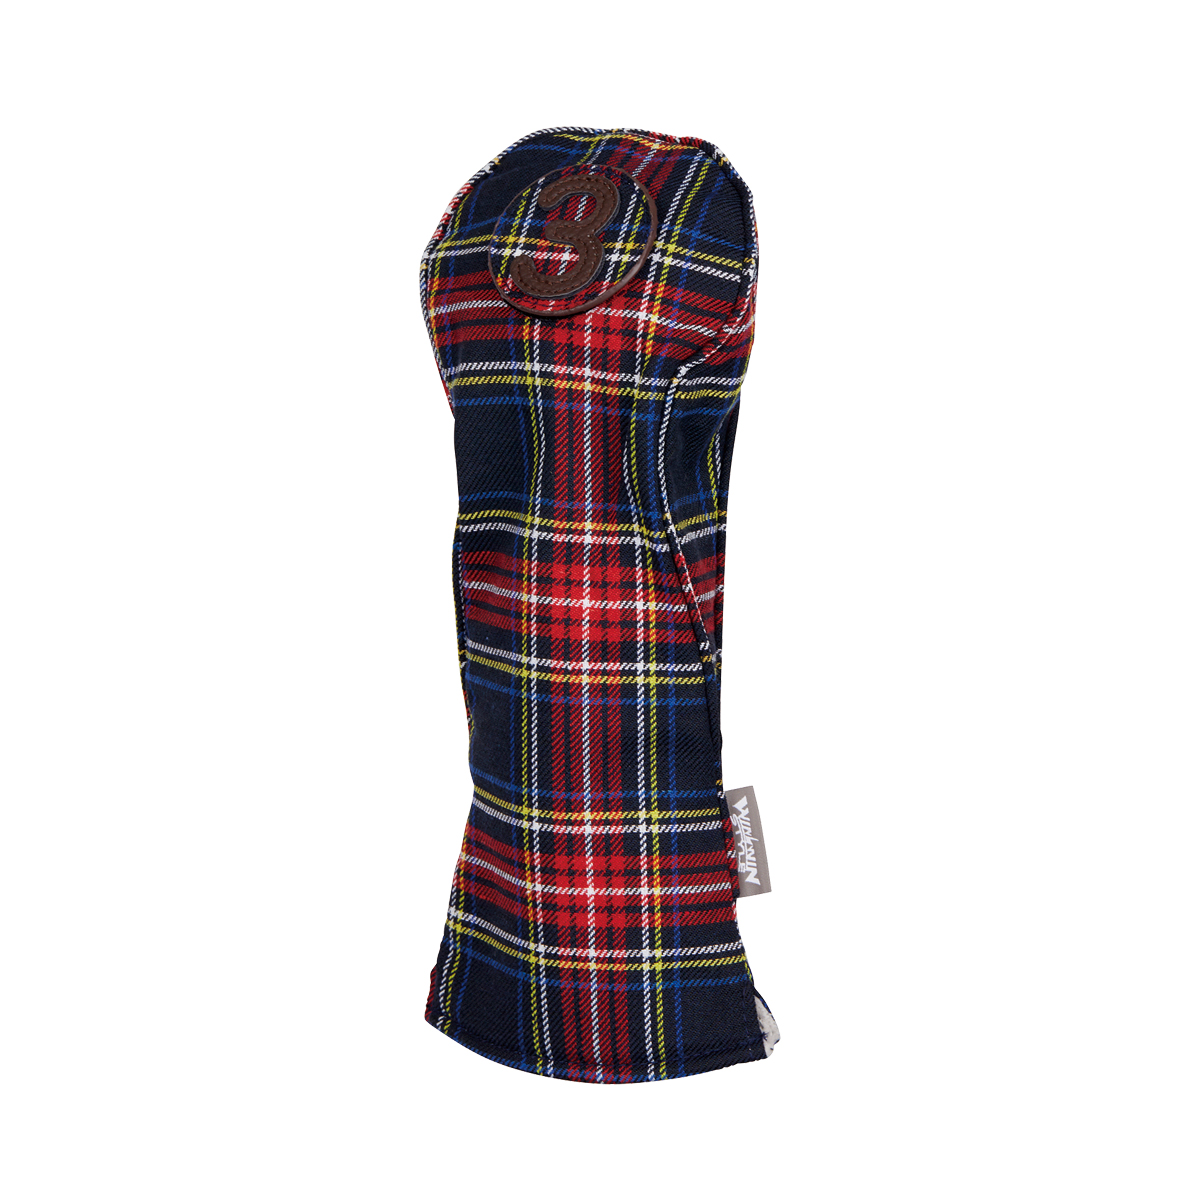 NEO TRADITIONAL FAIRWAY WOOD COVER TARTAN CHECK